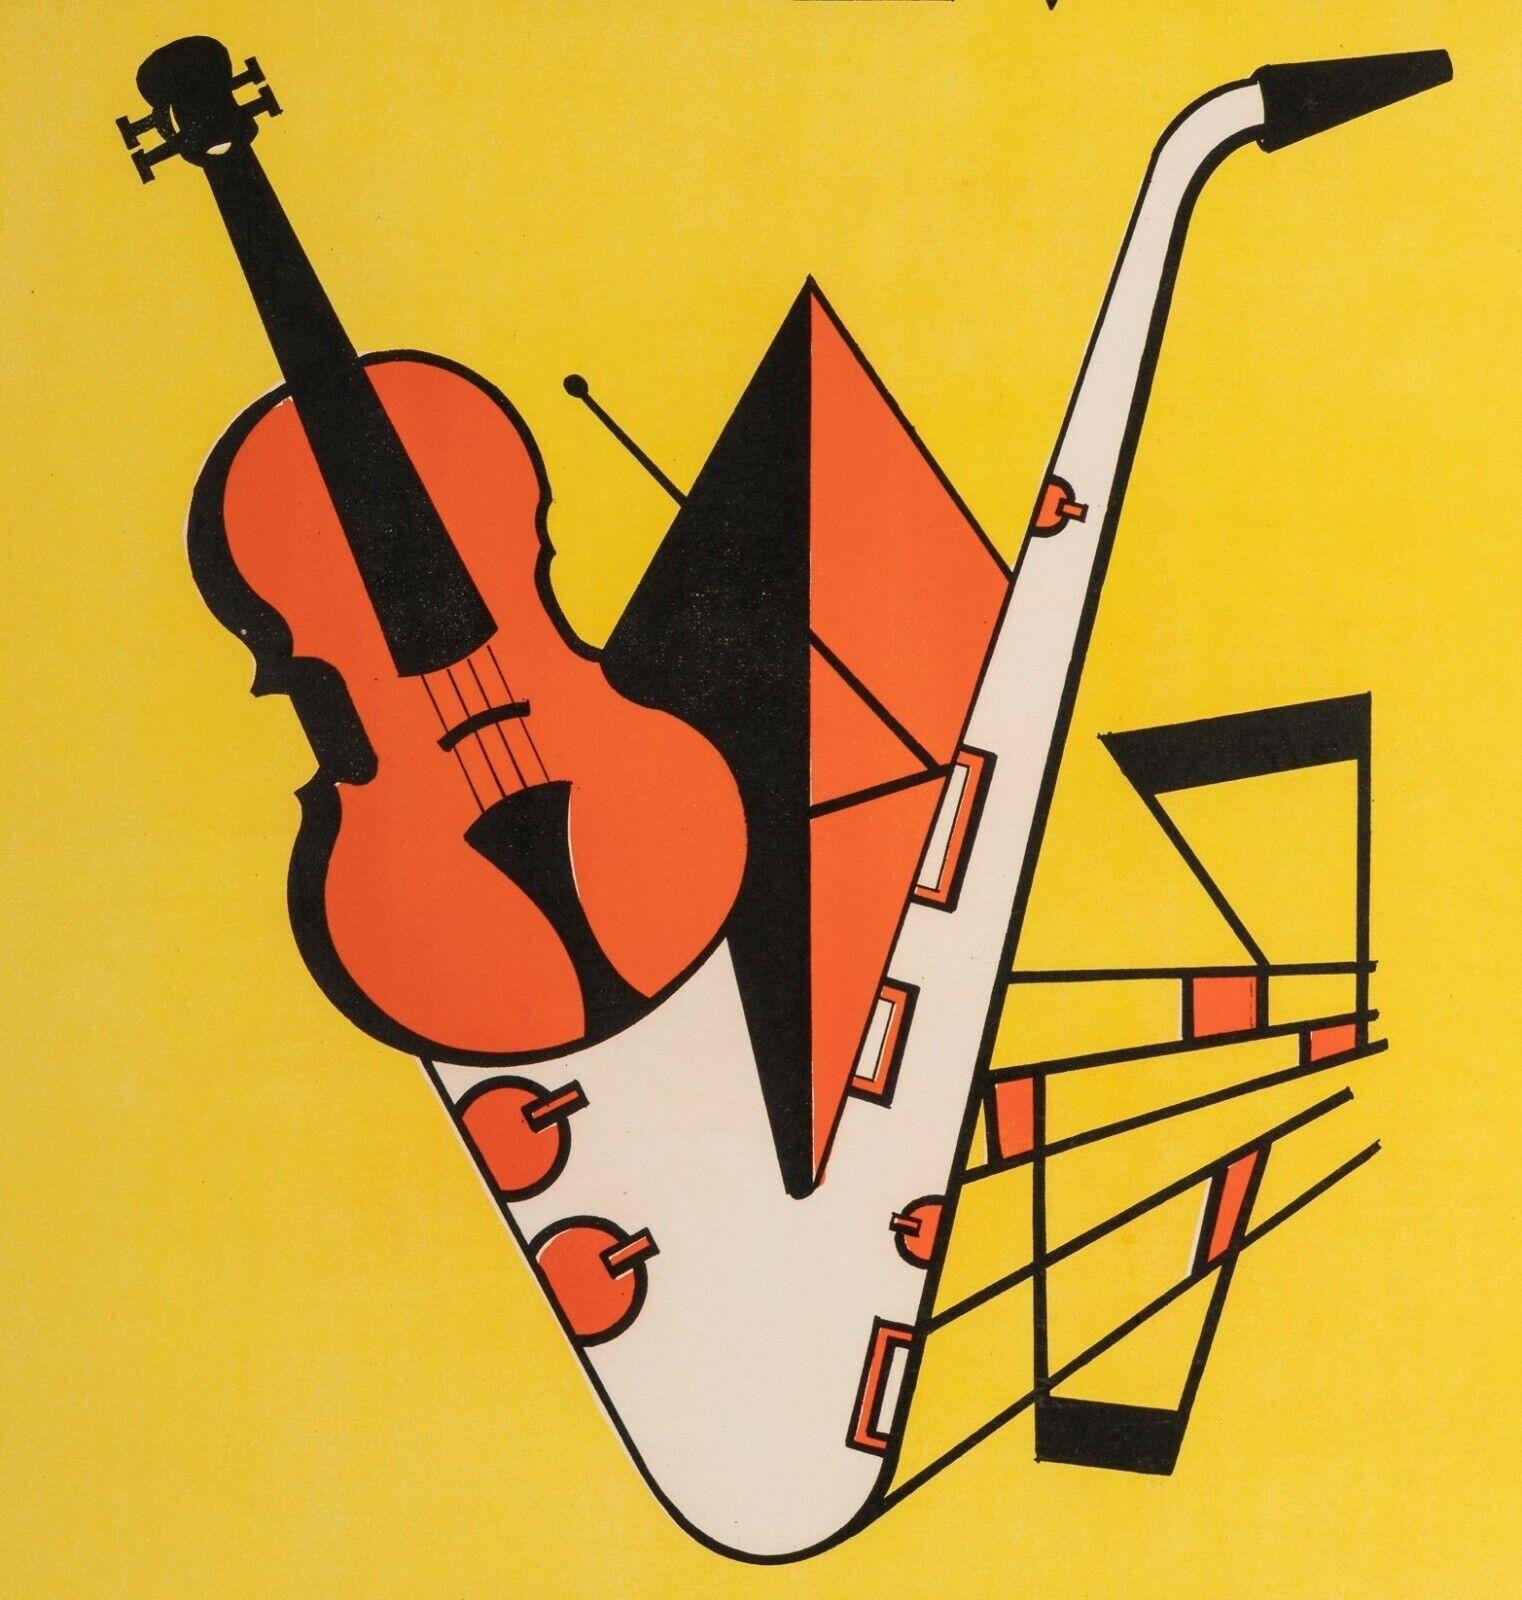 Original Vintage Jazz Poster-Musical Instruments-Violin-Saxophone, c.1950

Poster for the Vandeville music store which was located in Douai, in the Nord department, Hauts-de-France region.

Additional Details:
Materials and Techniques: Colour